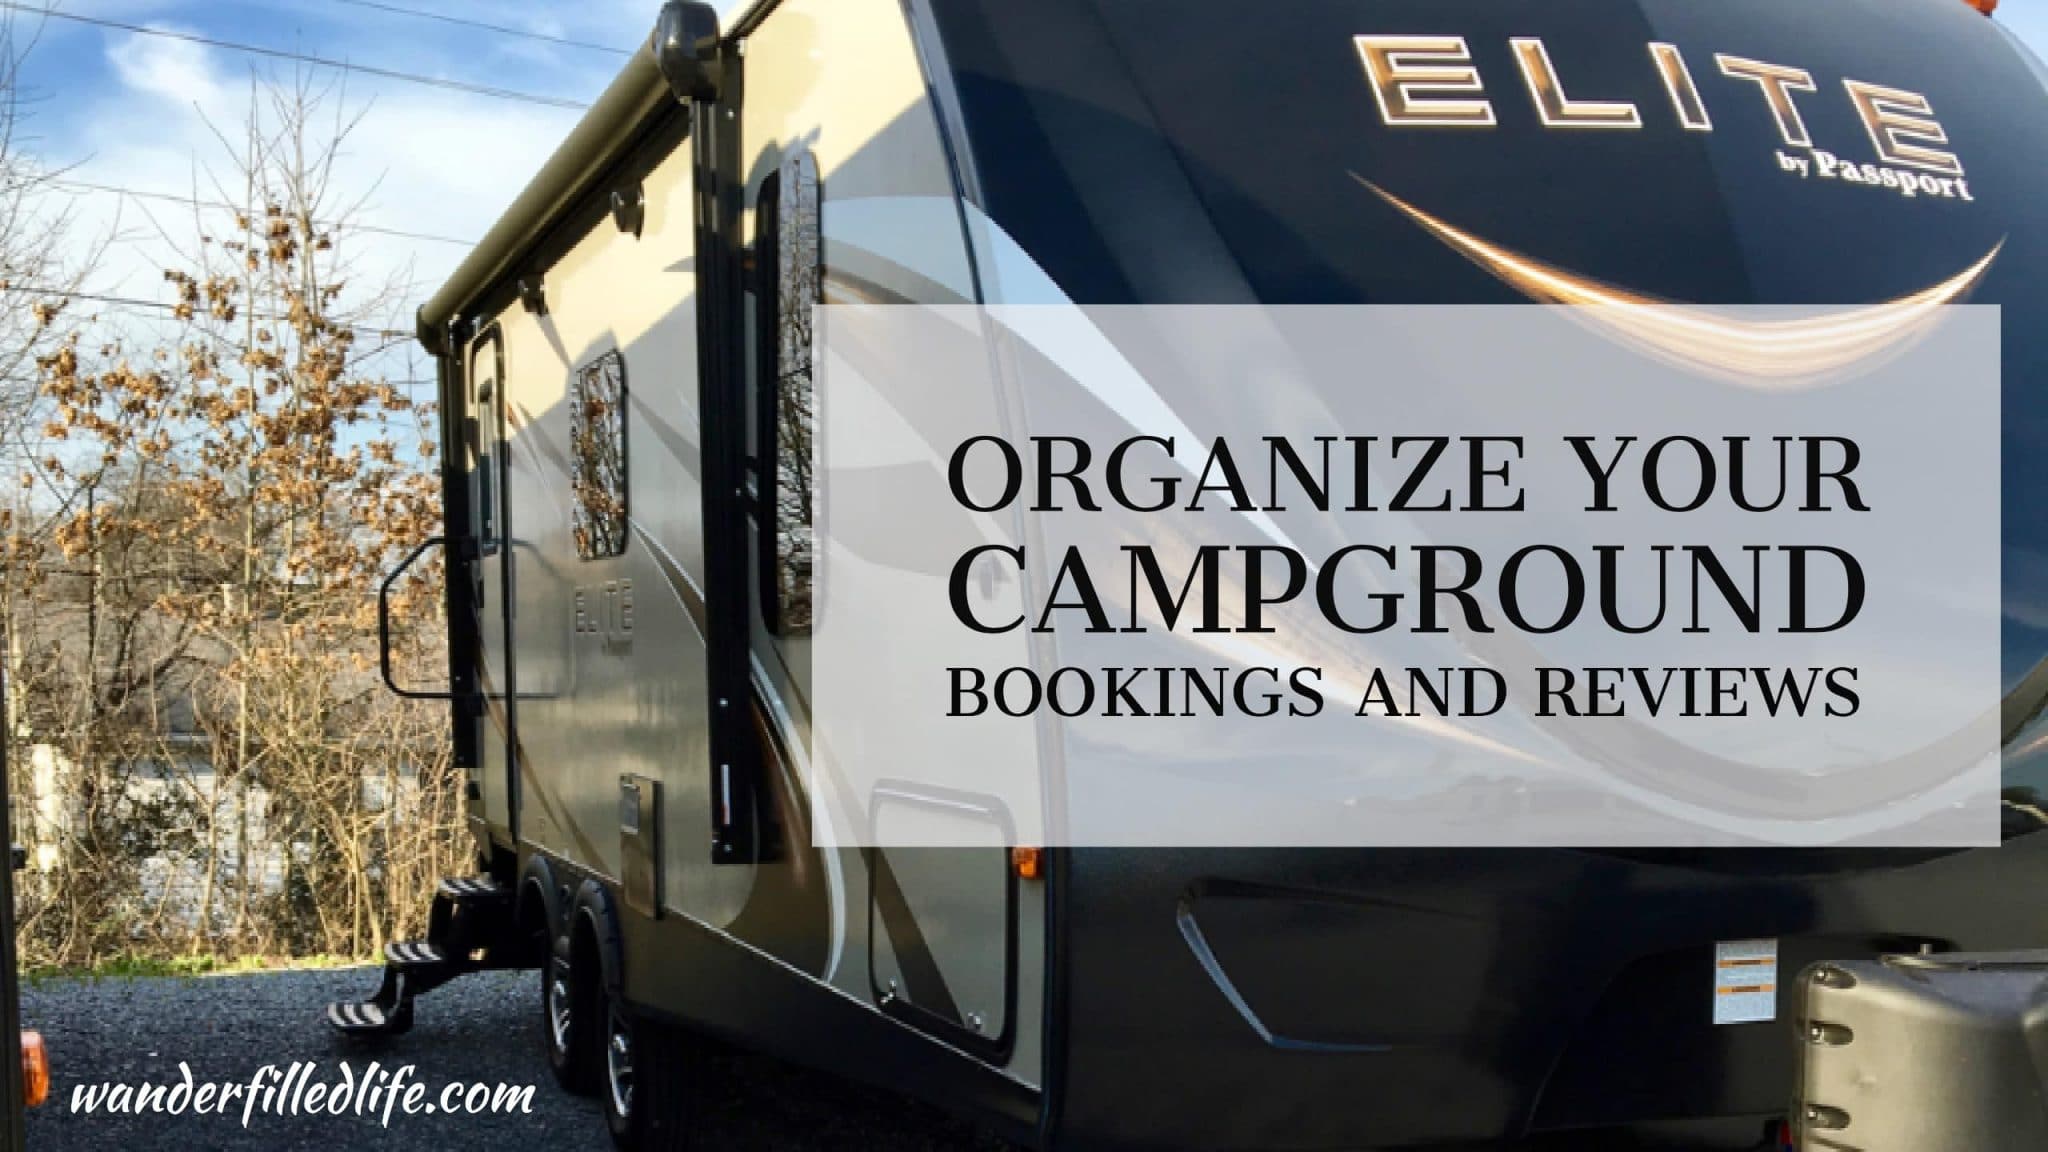 Organize Your Campground Bookings and Reviews